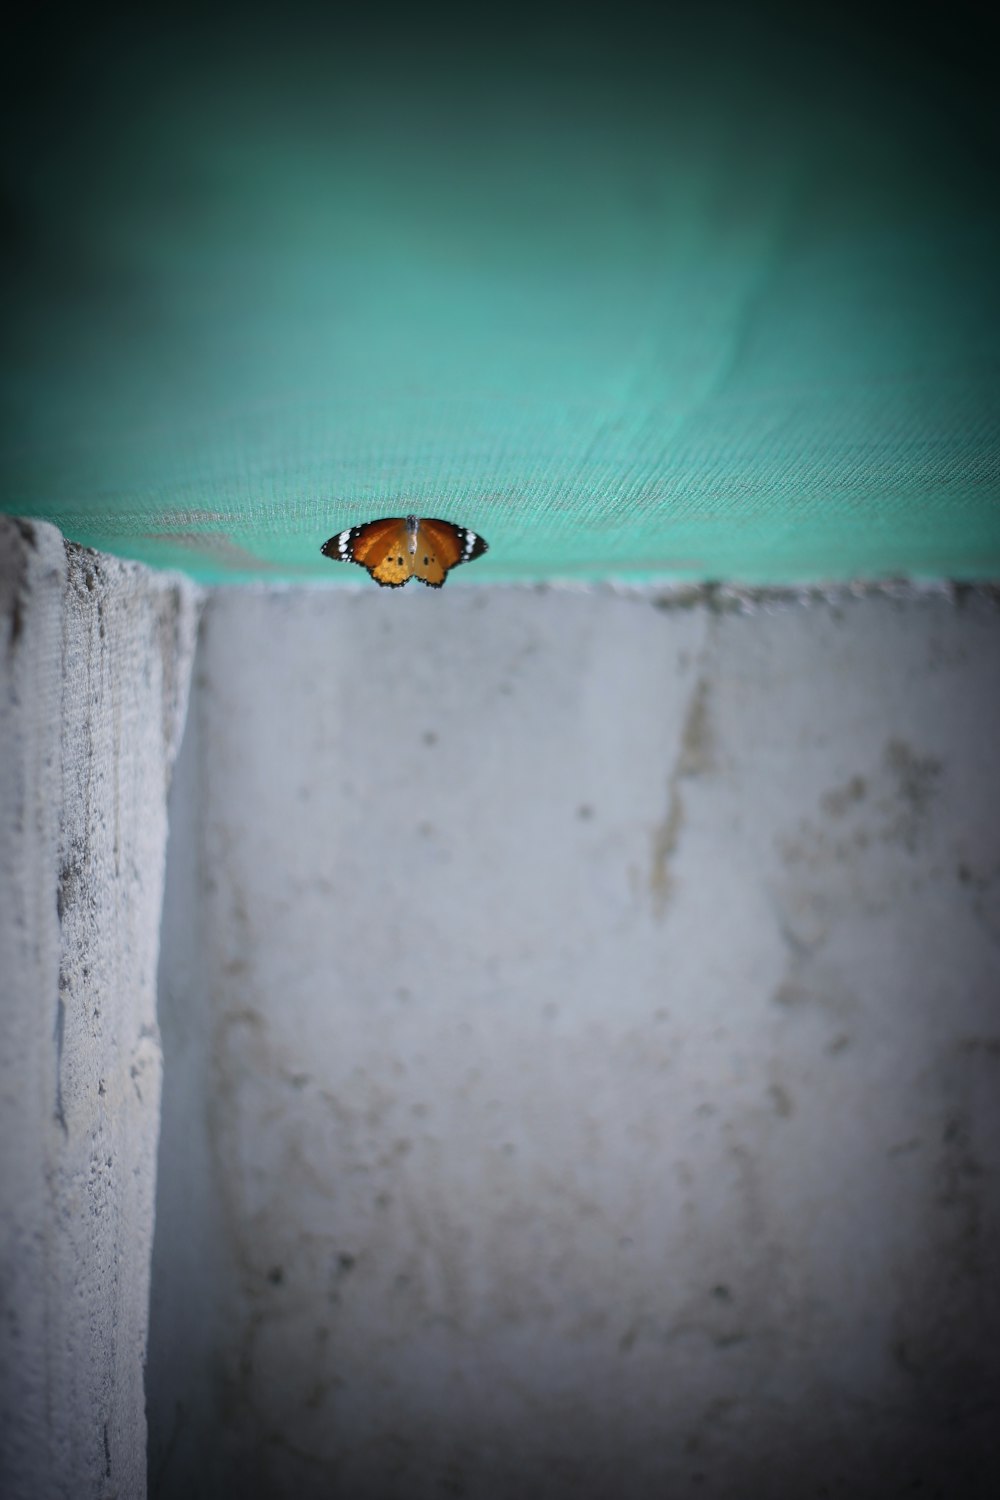 a close up of a butterfly on a wall